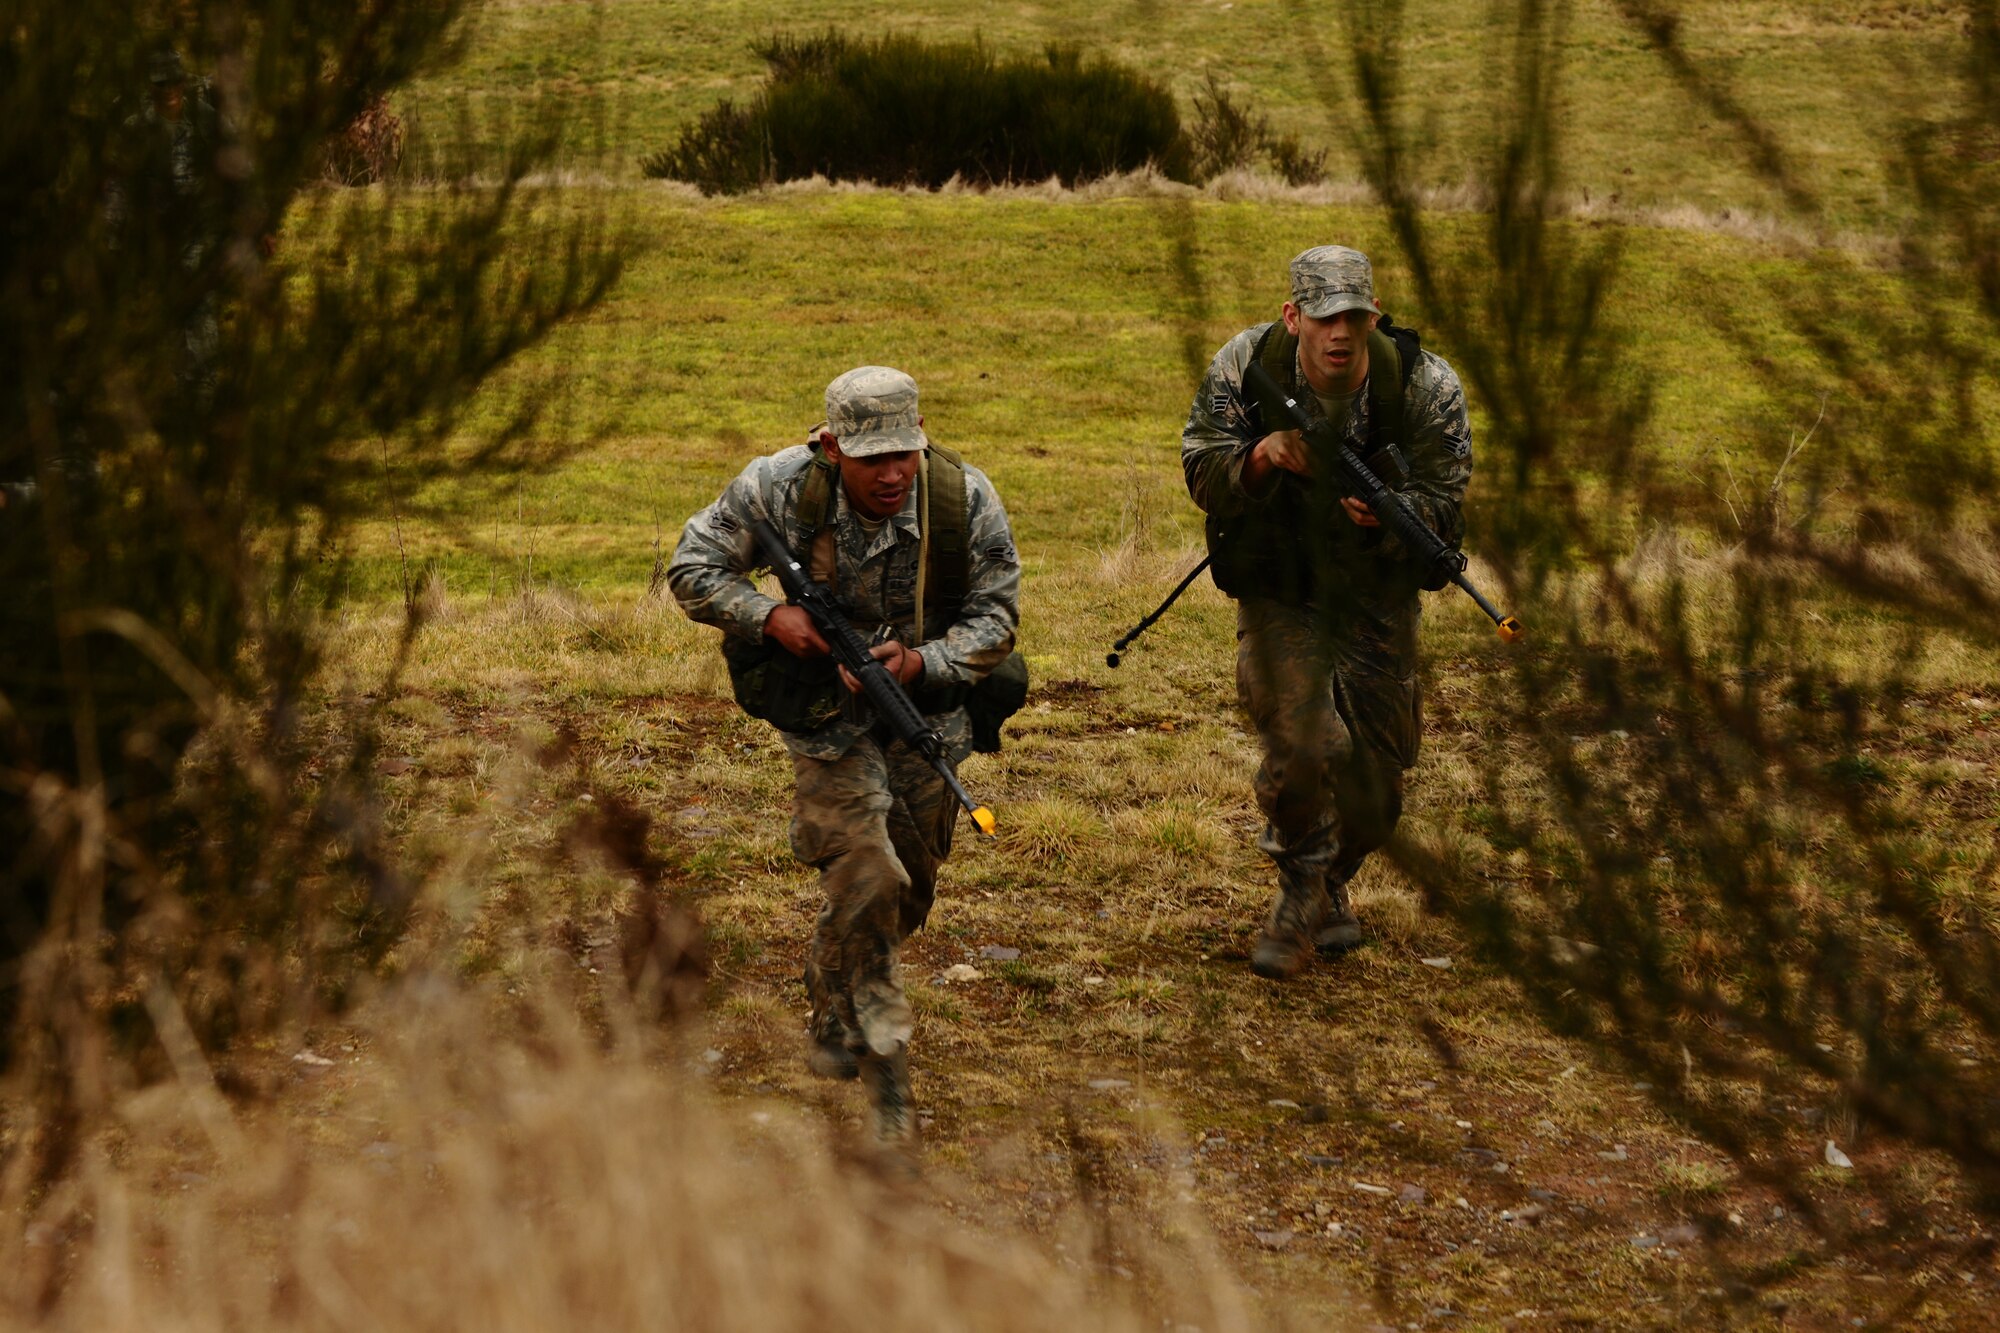 SPANGDAHLEM AIR BASE, Germany – Airman 1st Class Vicente Mattocks, left, 606th Air Control Squadron; and Senior Airman Coty Raphael, 52nd Medical Operations Squadron, advance on the enemy in a field next to Perimeter Road here during the patrolling training portion of the Ranger training course March 3. Any male Airman can volunteer for the annual training if they are serious about becoming a U.S. Army Ranger and their chain of command allows him to participate. The required three-day course prepares Airmen for what they will be tested on during the Ranger training school at U.S. Army Fort Benning, Ga. Out of the five Airmen enrolled in the training, Senior Airman Sean Reval, 52nd Security Forces Squadron, and Senior Airman Coty Raphael, 52nd Medical Operations Squadron, were the only participants to qualify to continue on to Ranger pre-assessment training at Sembach Air Base, Germany. (U.S. Air Force photo by Airman 1st Class Dillon Davis/Released)